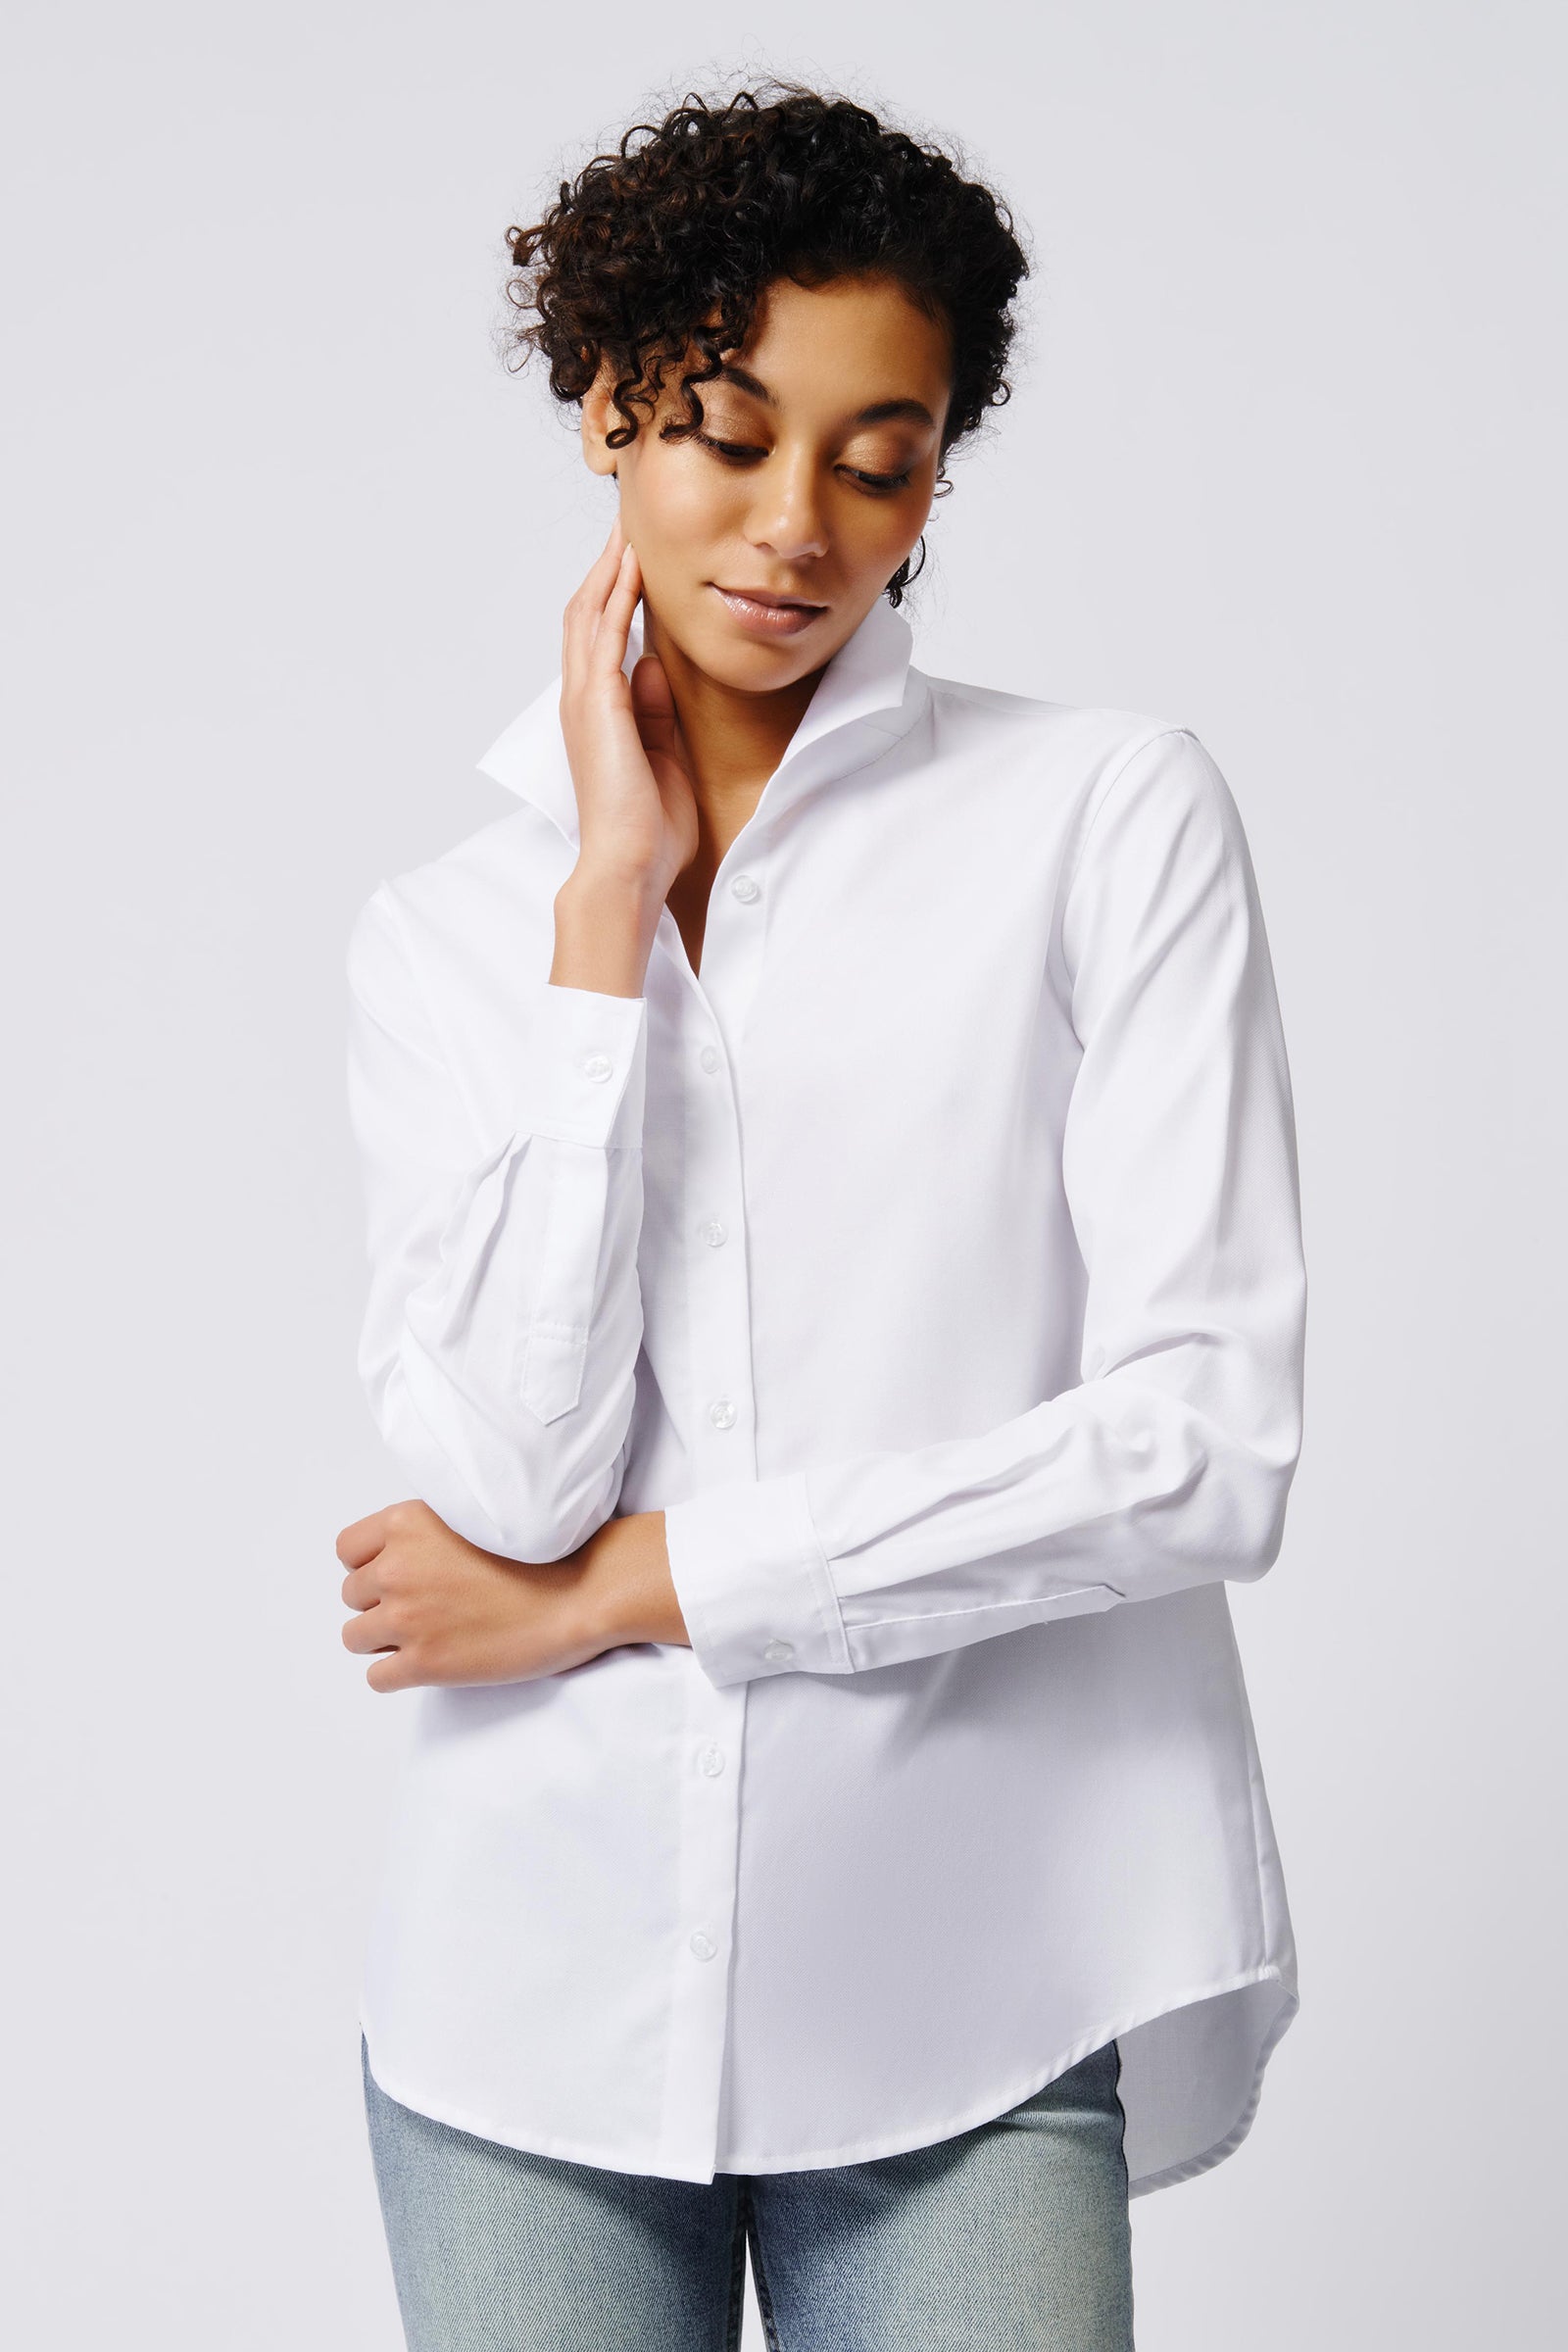 Kal Rieman Ginna Box Pleat Shirt in White Pinpoint Oxford on Model Front View Crop 3